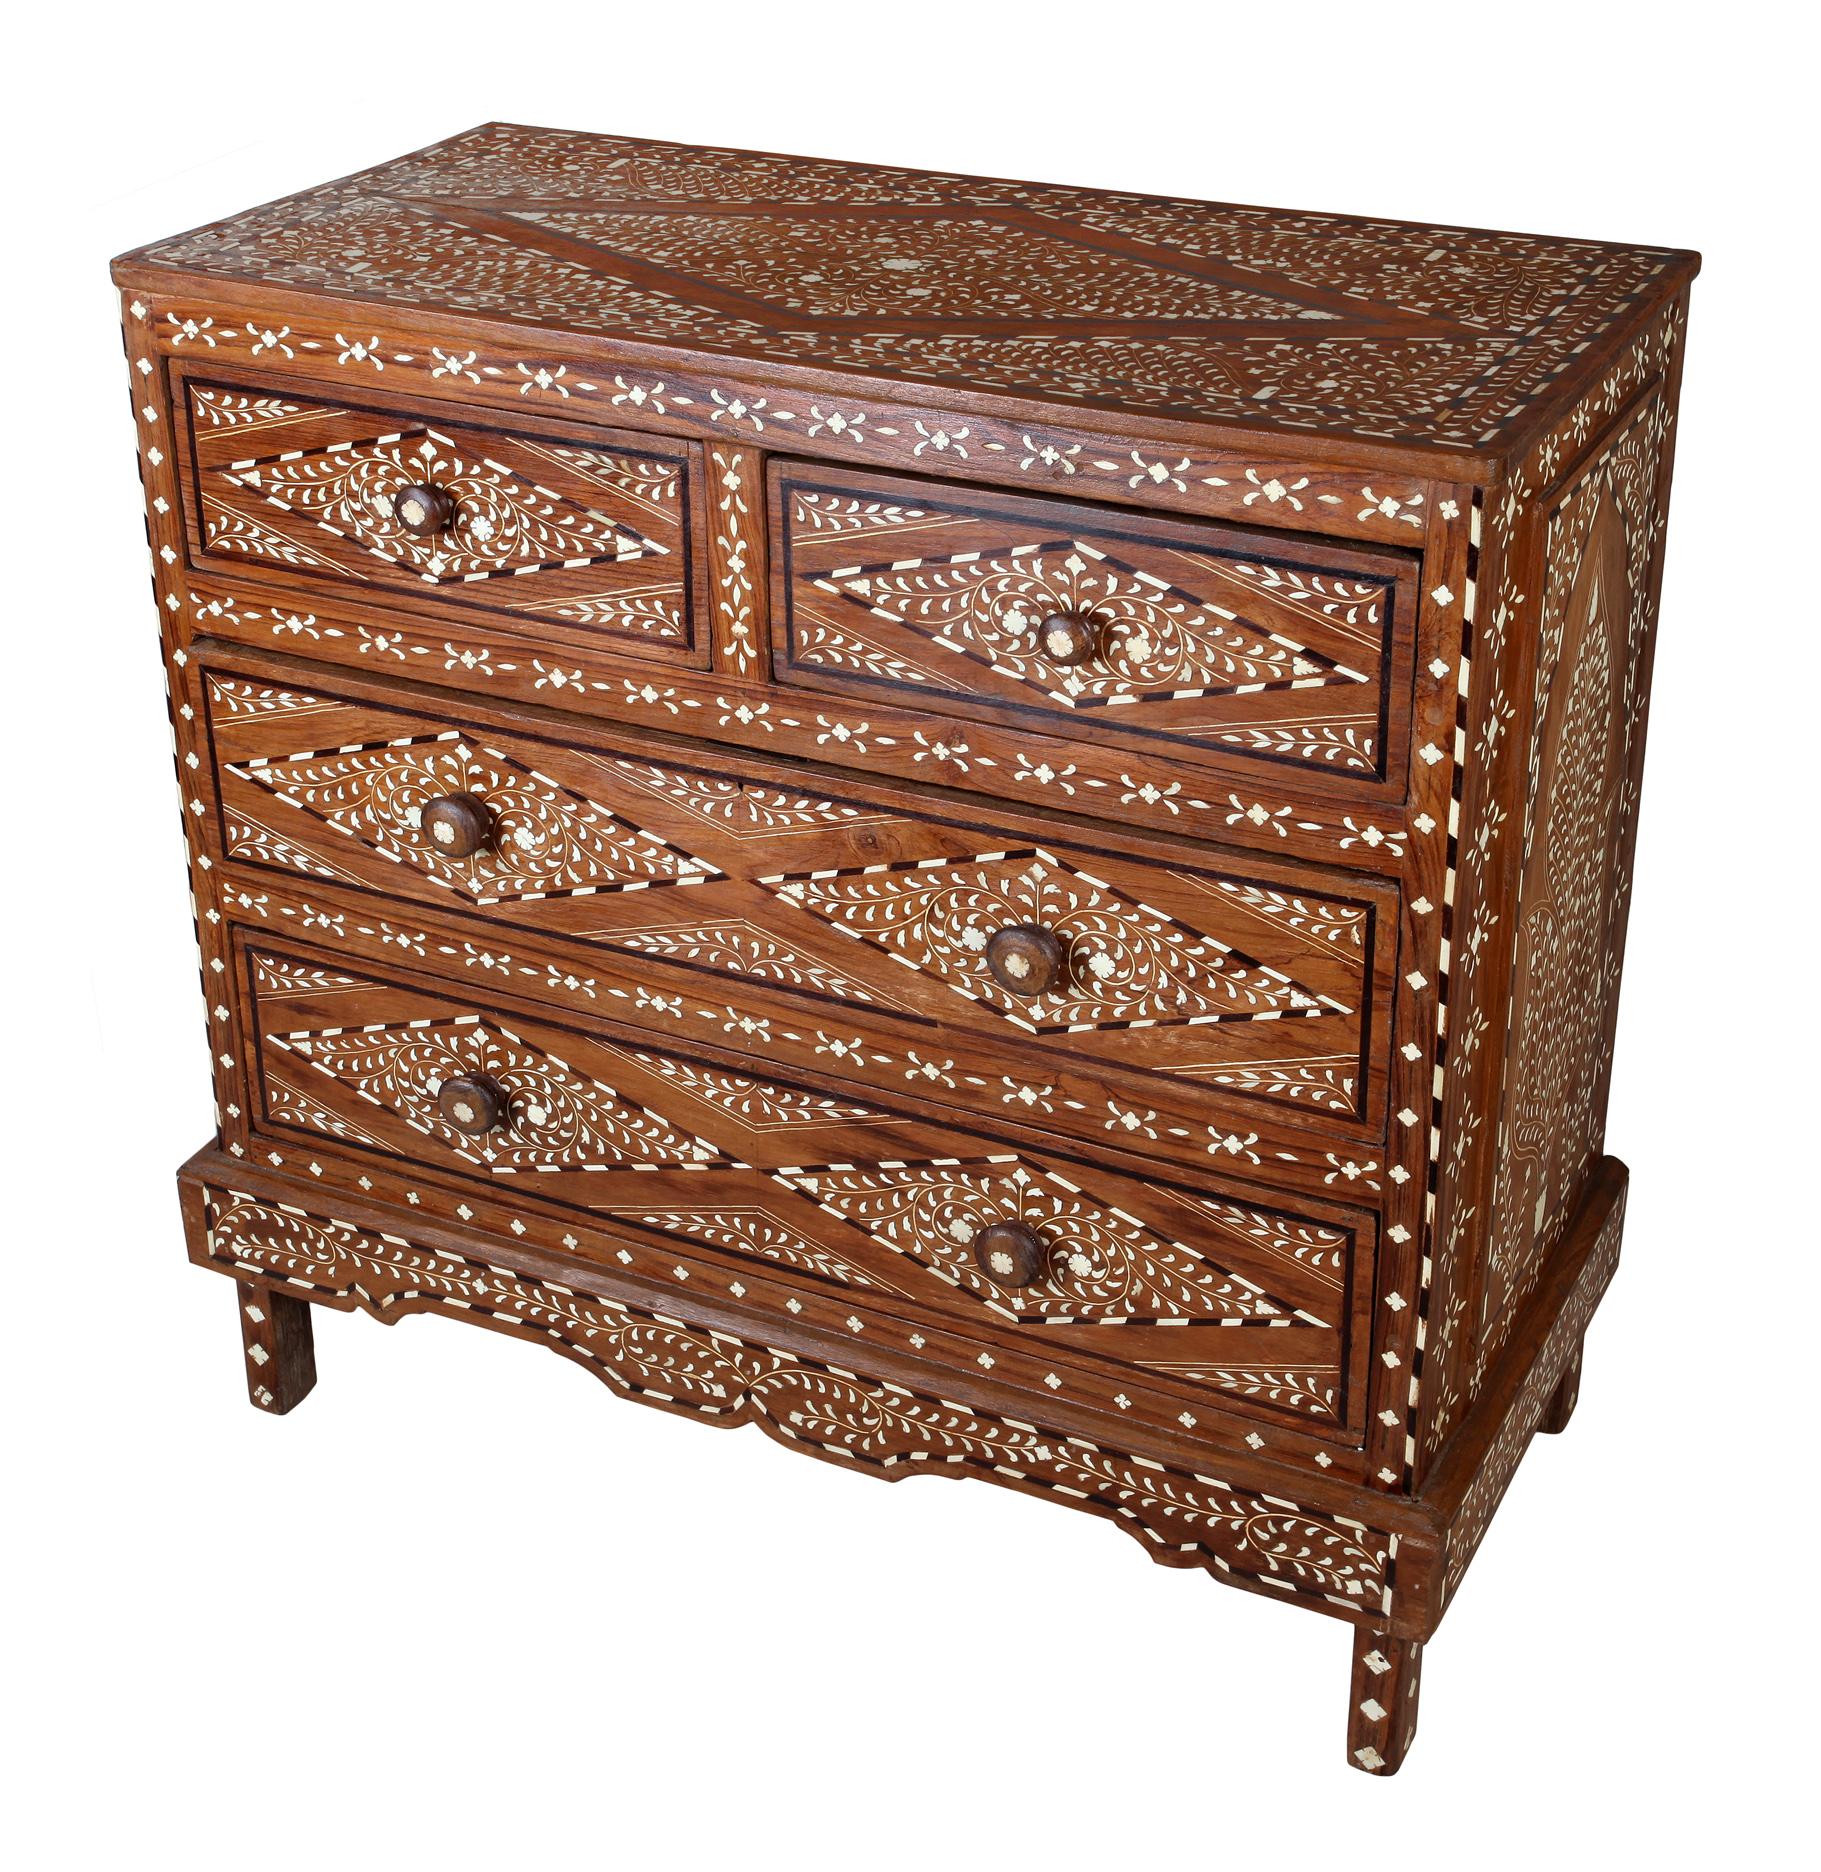 Mid-20th century teak chest of drawers with bone and rosewood inlay on all three sides and top. Intricate and finely detailed turned round drawer pulls also with inlay at the center. A nice combination of geometric and floral patterns. Straight